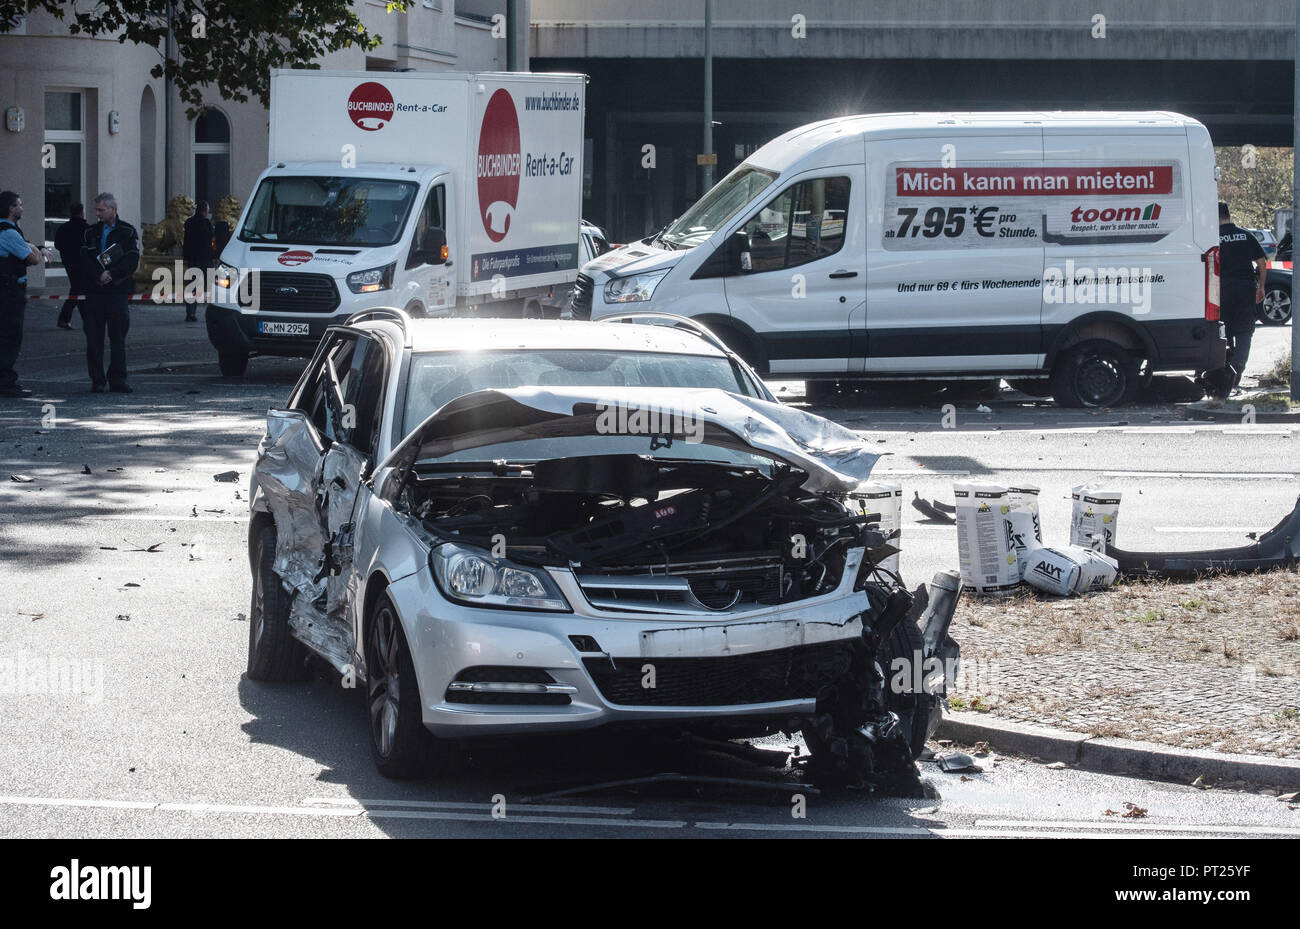 Berlin, Germany. 6 Germany 2018. Damaged vehicles parked at the  intersection at Bundesplatz ater an accident. Three cars and two vans were  involved in the accident, five people were seriously injured and